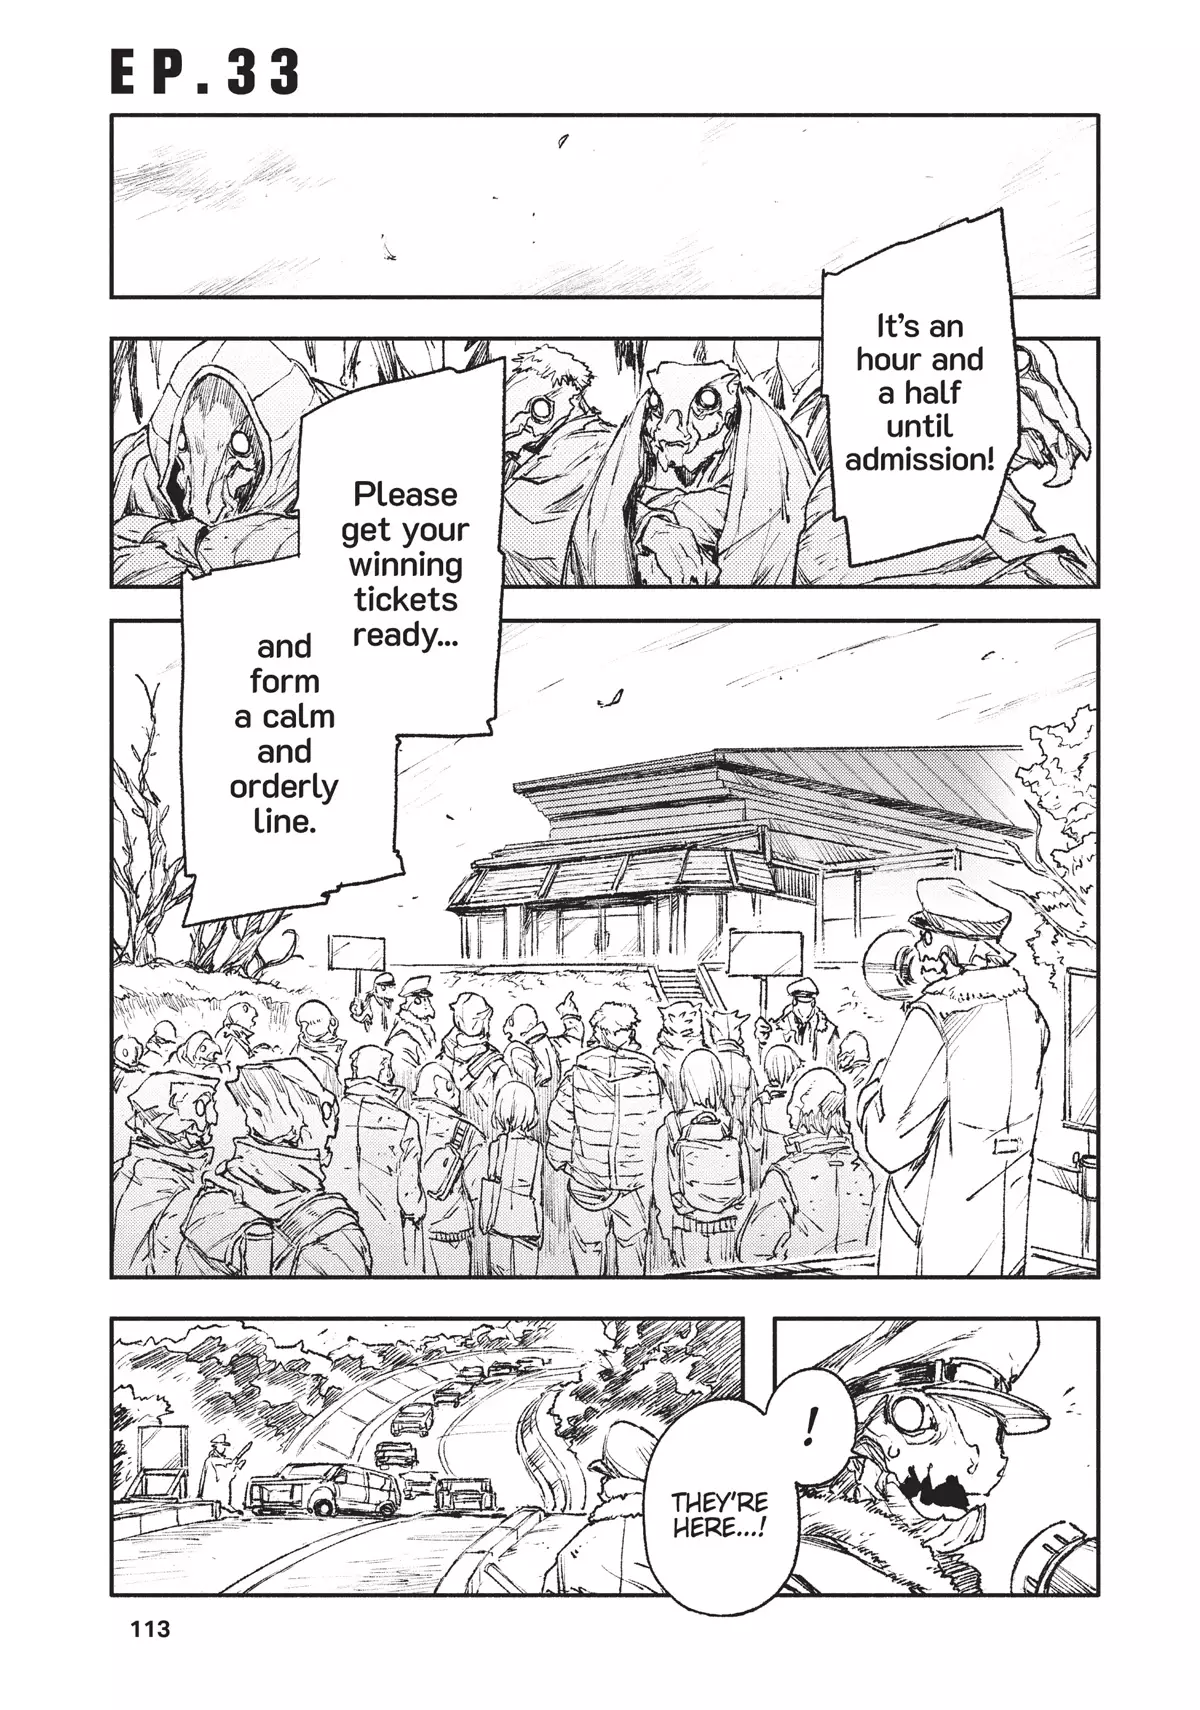 Colorless - 33 page 1-98d42a00